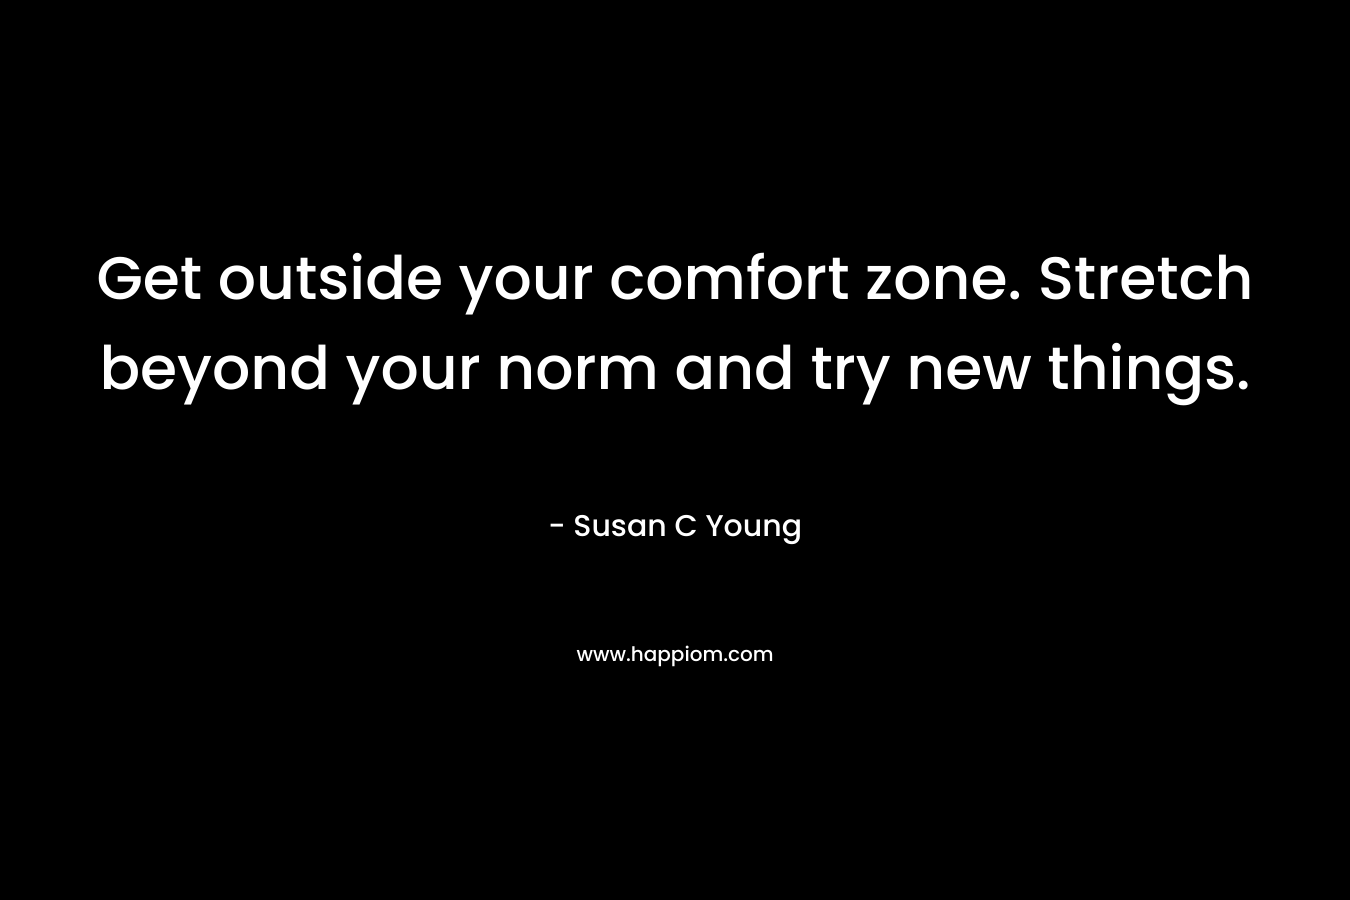 Get outside your comfort zone. Stretch beyond your norm and try new things. – Susan C Young